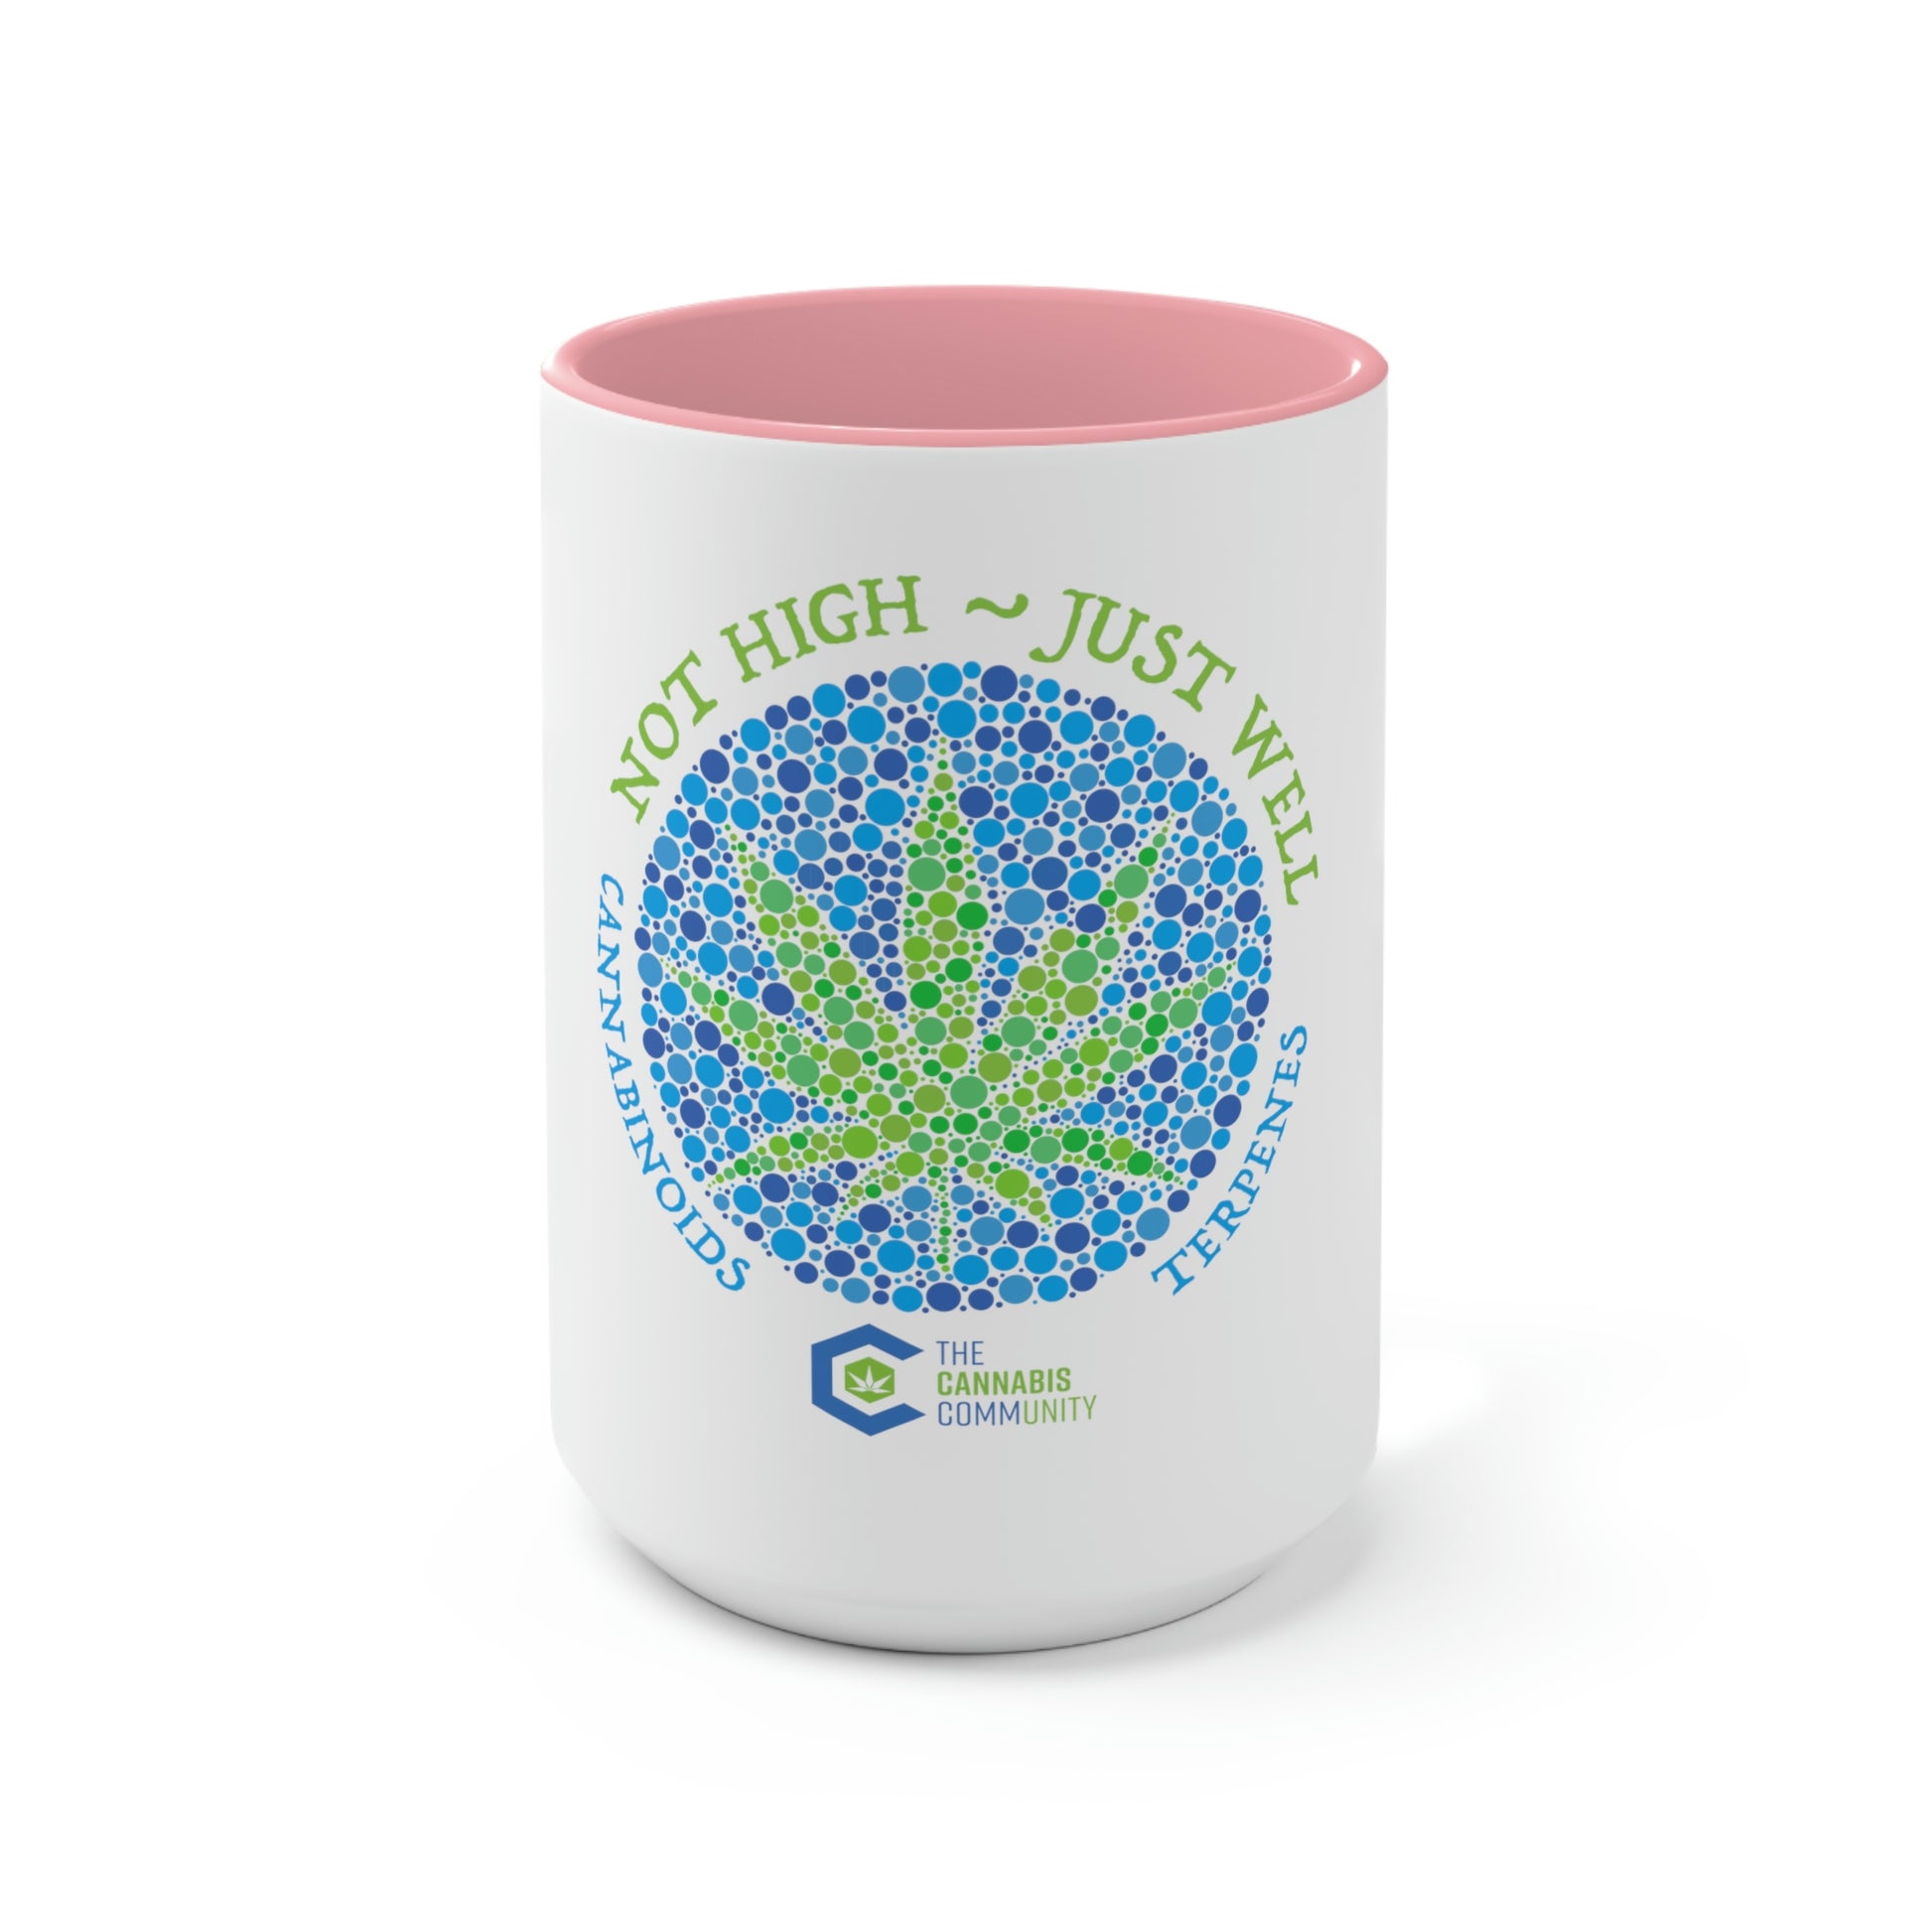 The front side of the pink and white "not high, just well" cannabis coffee mug, featuring a cannabis leaf make up of green and blue dots of various sizes.